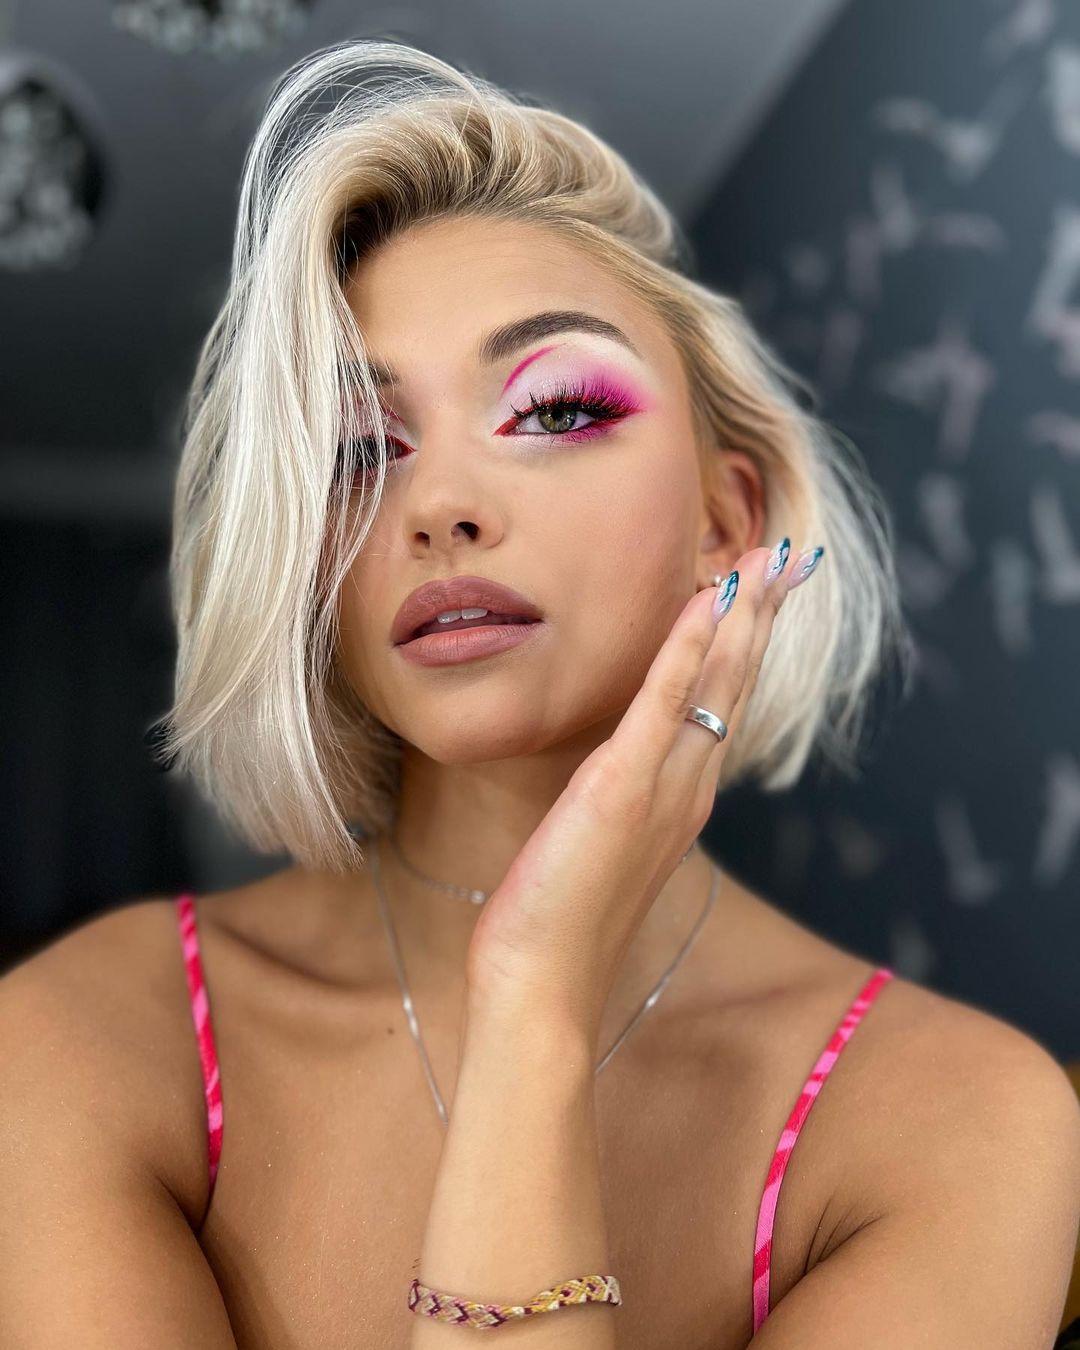 Pink and White Eyeshadow Makeup